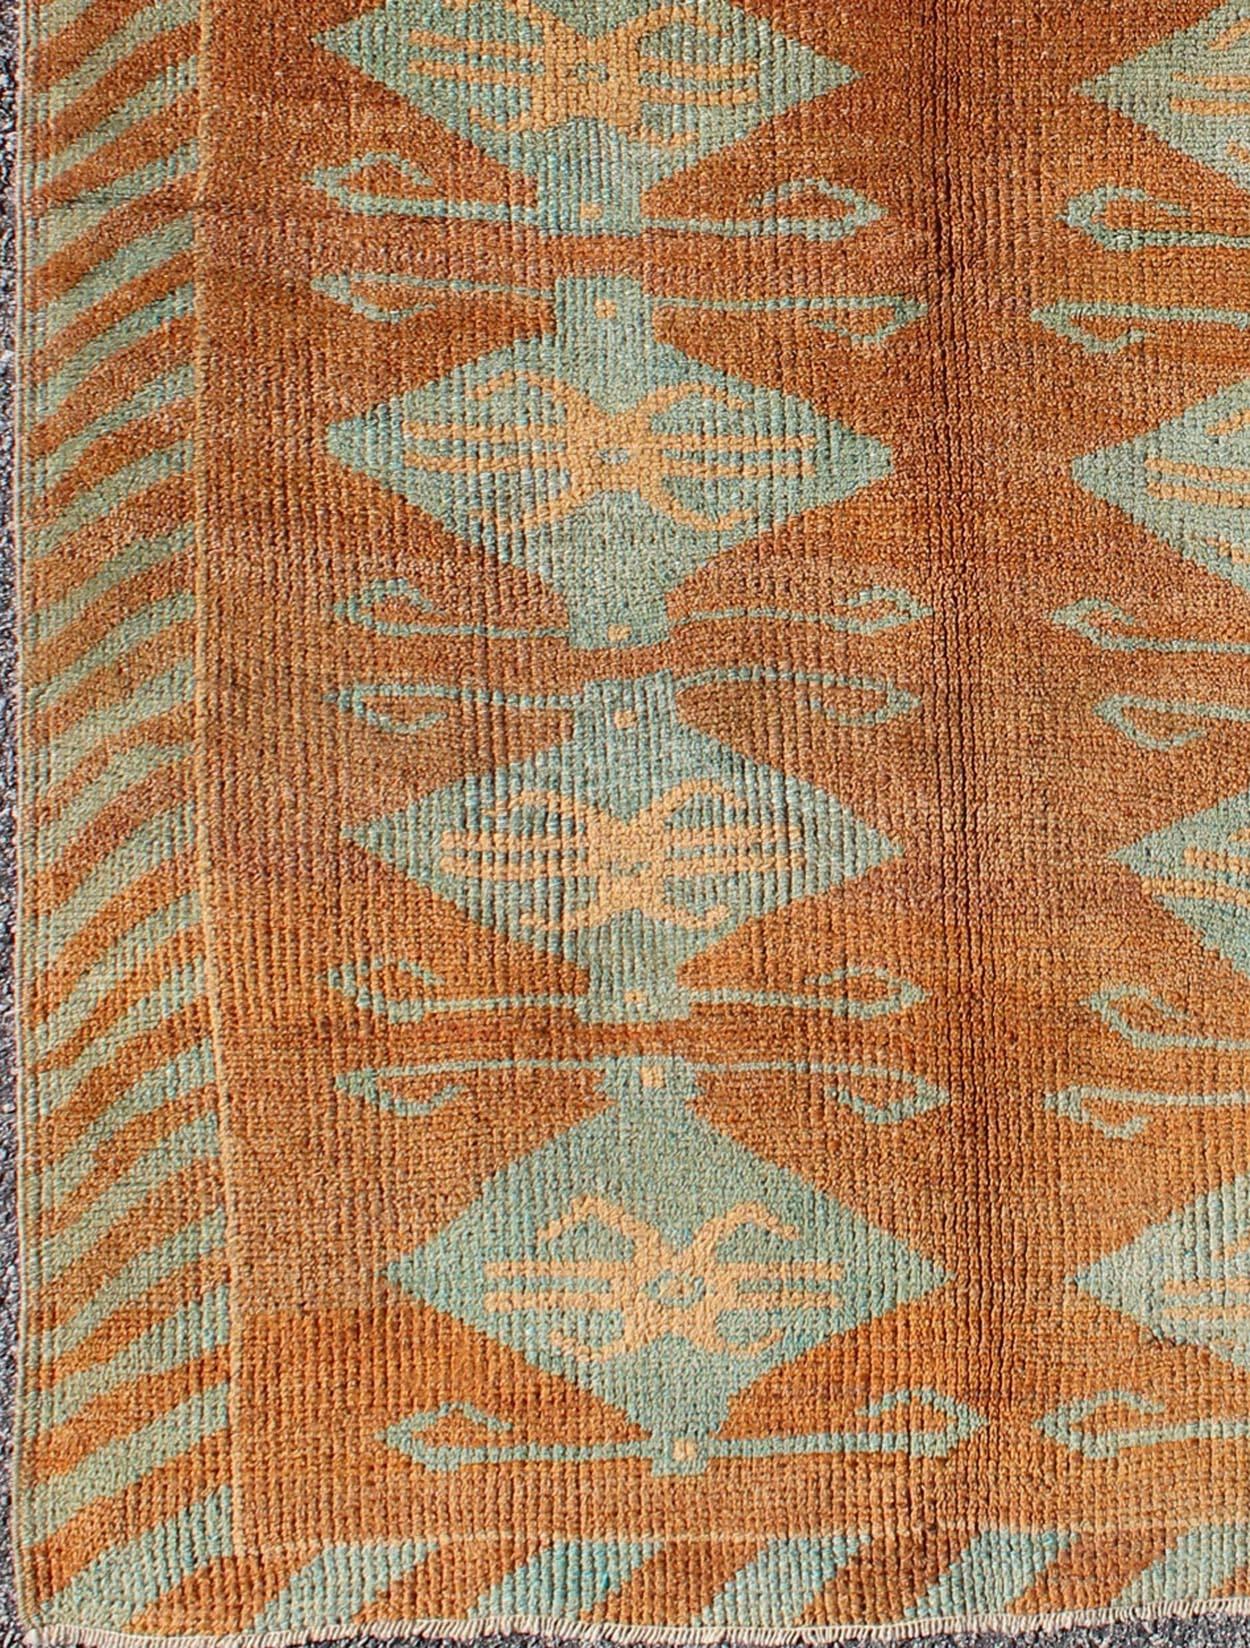  Antique Turkish Tulu Rug with Tribal Medallions in Copper and Light Blue green.   Antique Tulu rug, Keivan Woven Arts/ rug TU-9102, country of origin / type: Turkey / Tulu, circa 1930's

Measures: 4.7 x 6.2.   

This antique Turkish Tulu-Oushak rug